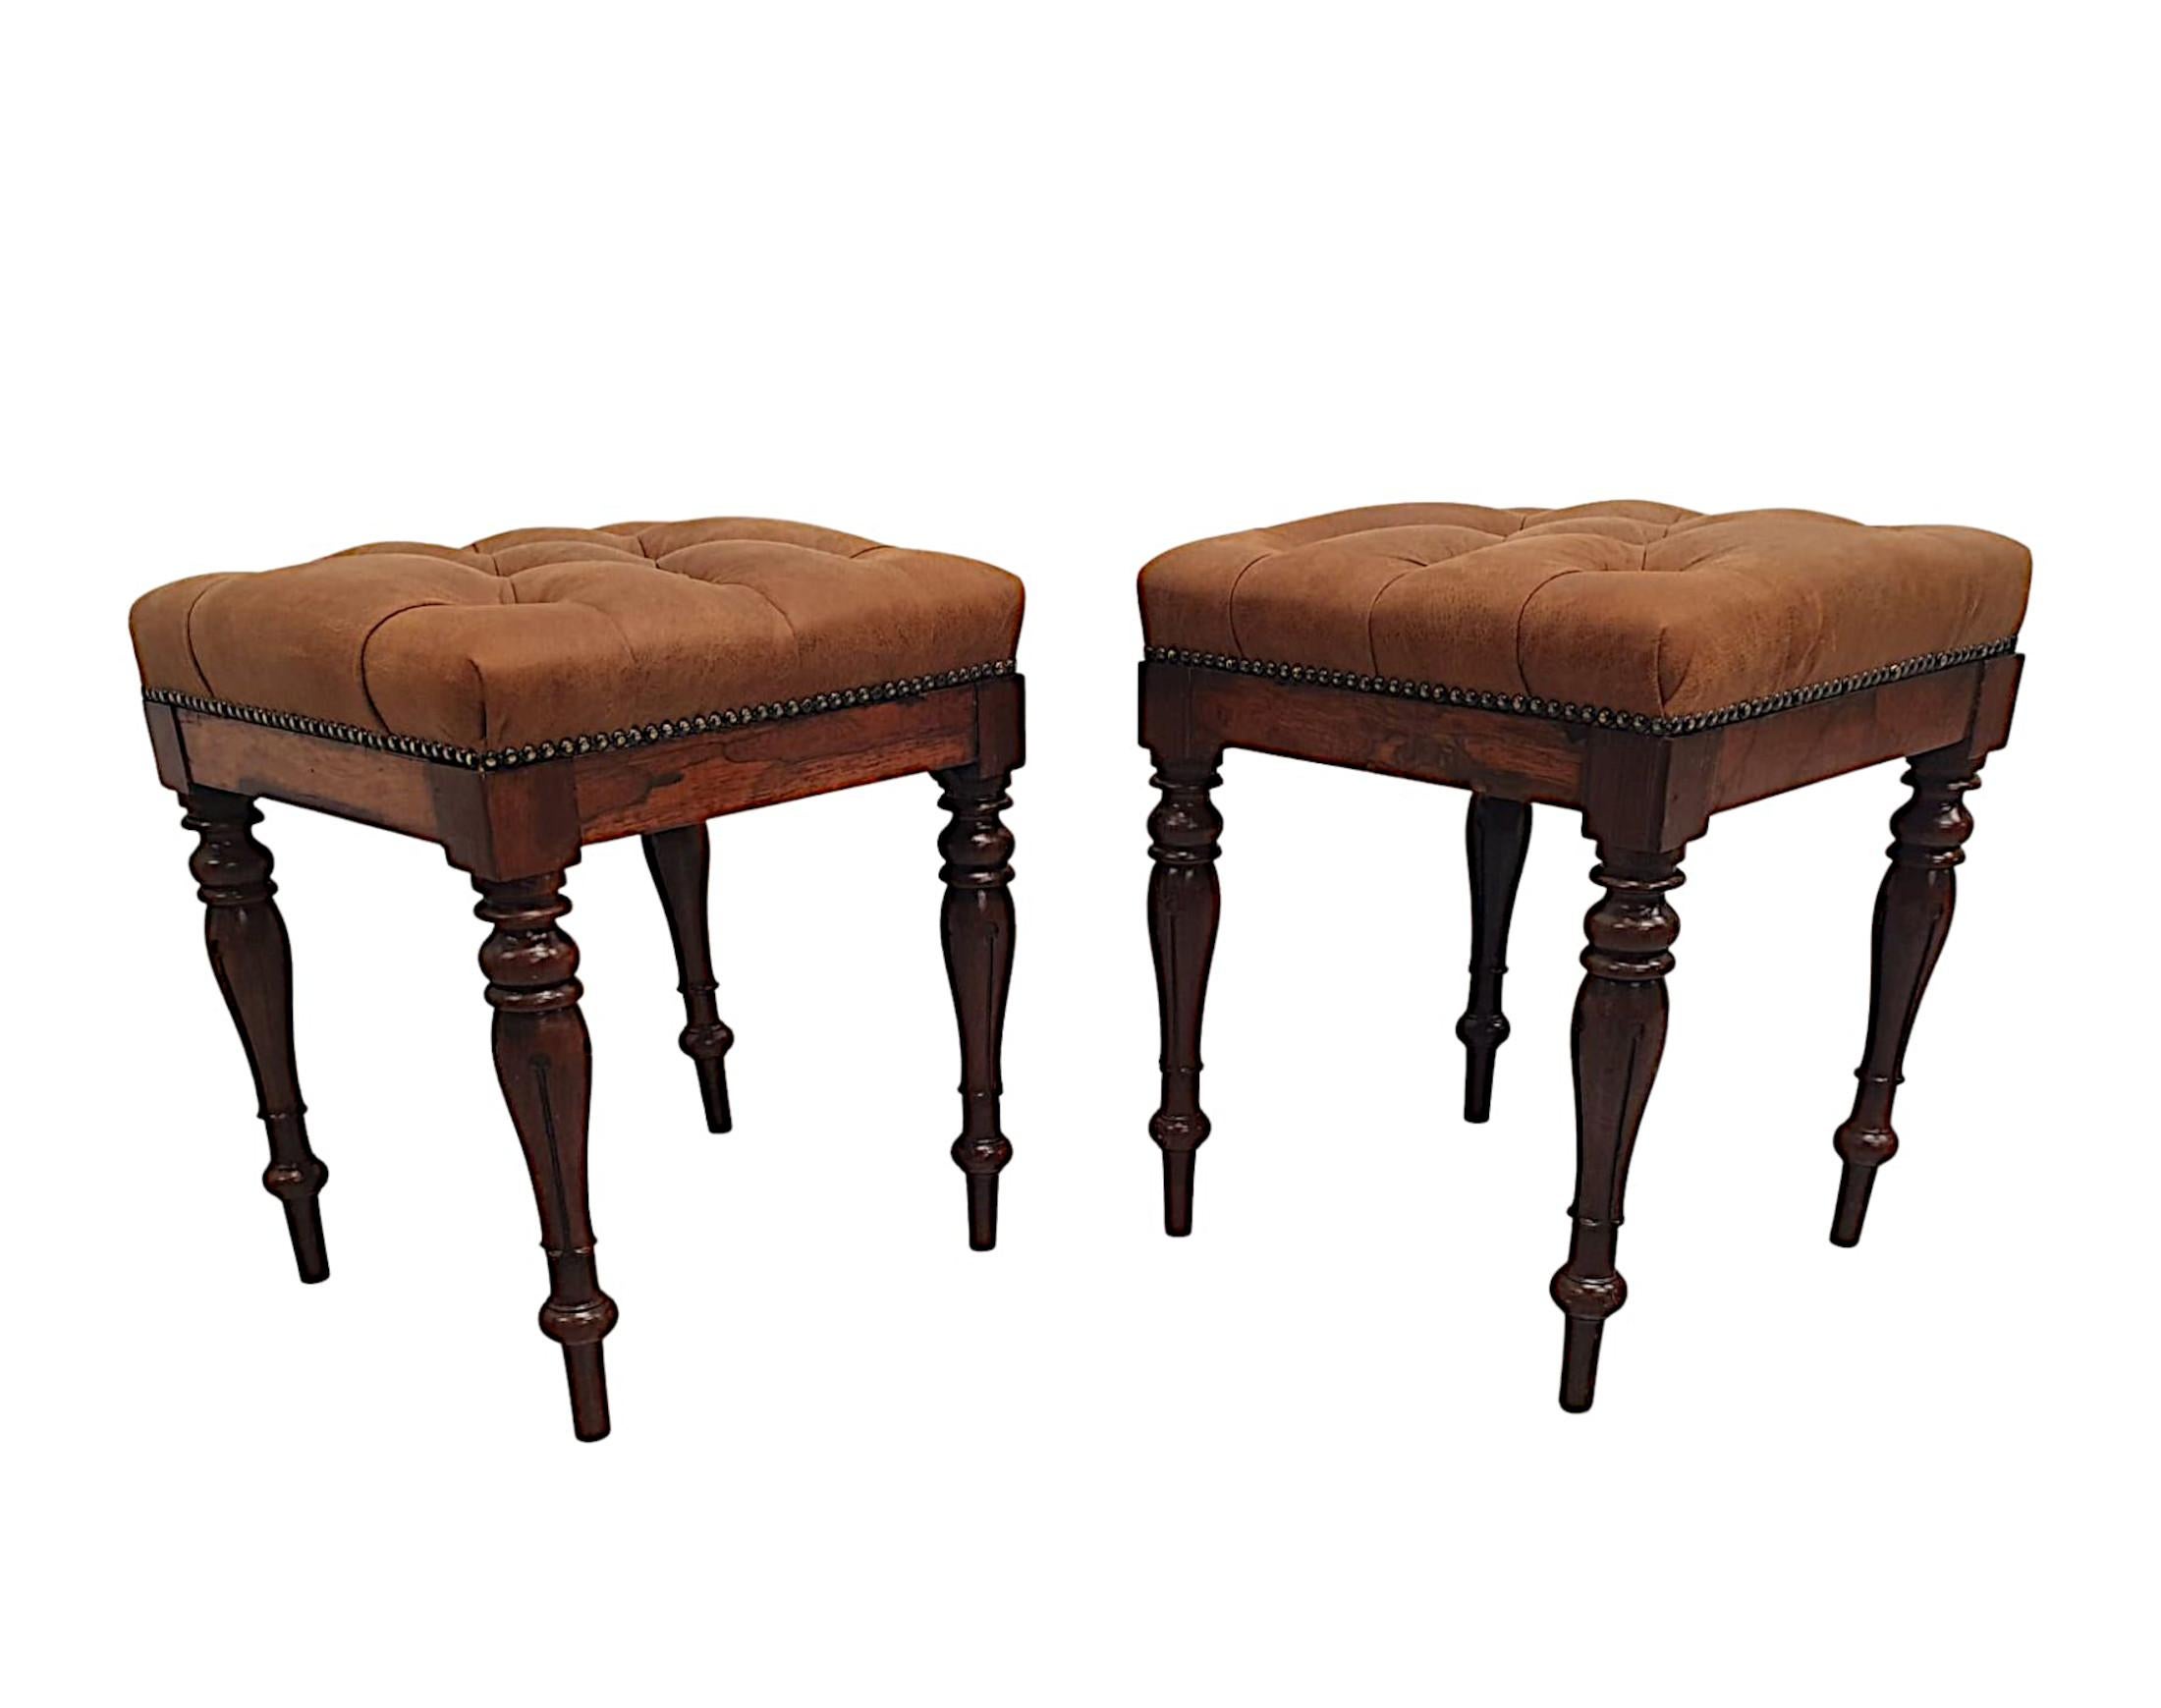 A very fine pair of early 19th century fruitwood stools, finely hand carved with gorgeously rich patination and grain. The padded, deep buttoned seat is of square form and upholstered in fabulous tan leather with brass studded trim. Raised over